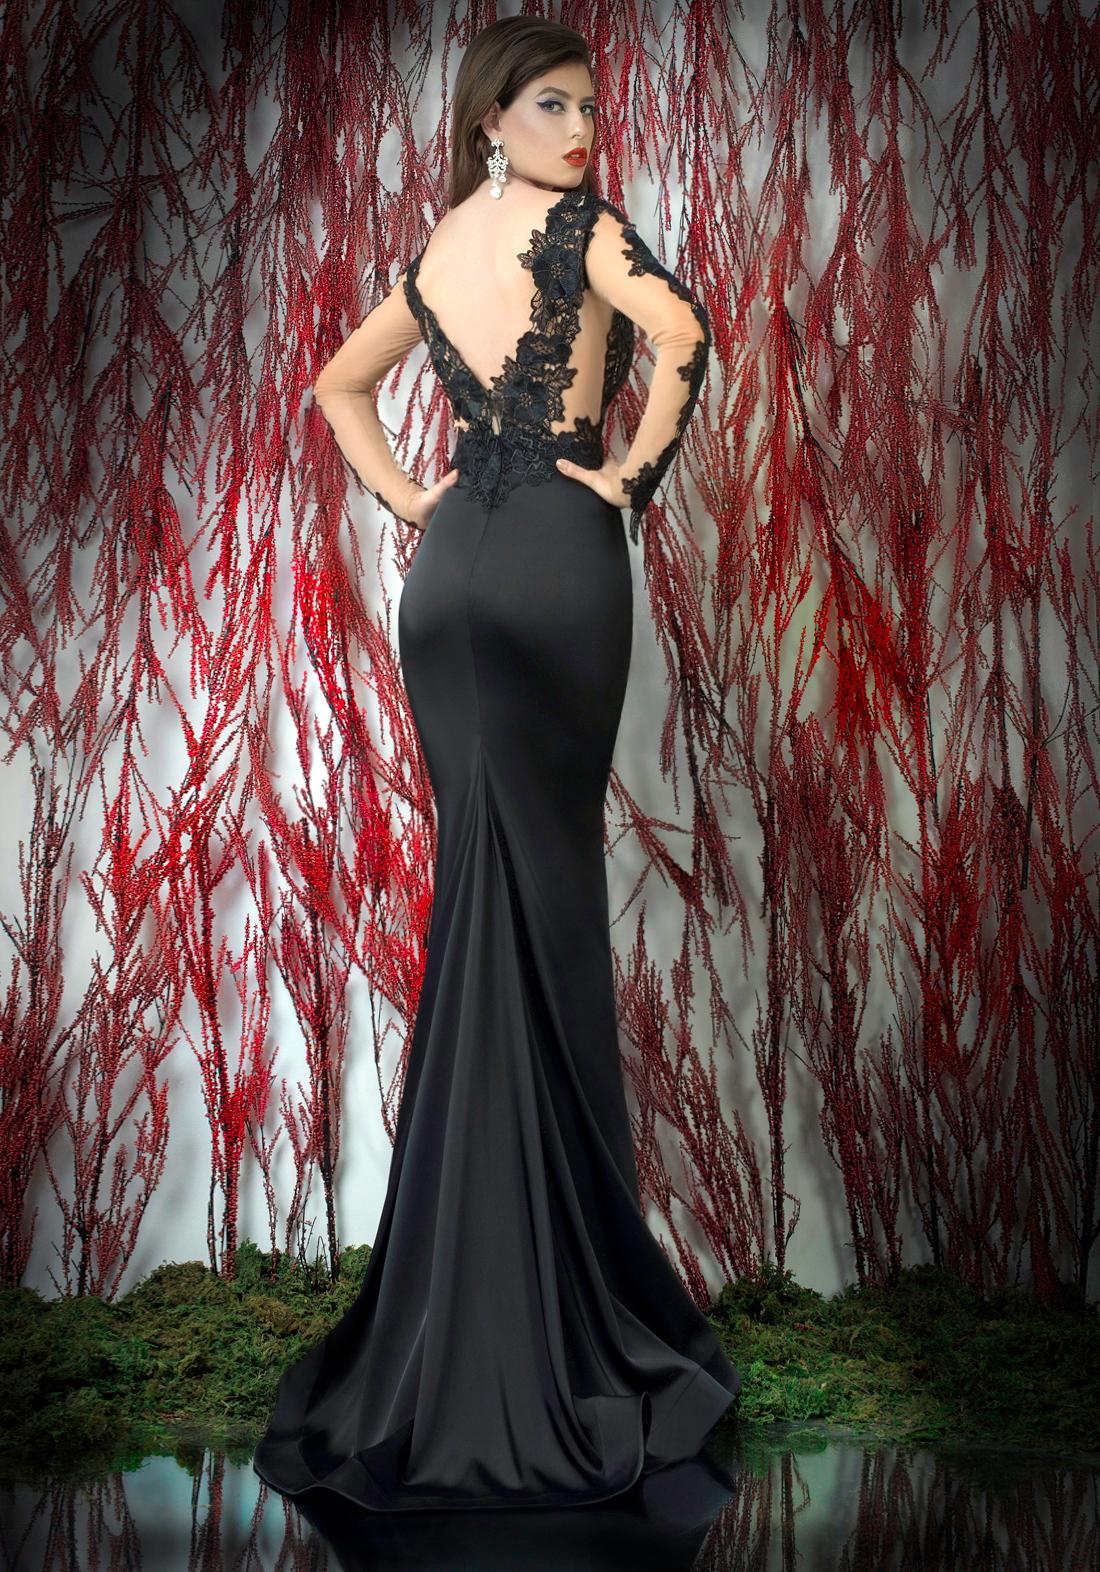 A Line Sequin Embellished Bodice Long Strapless Sweetheart Black Prom Dress_2